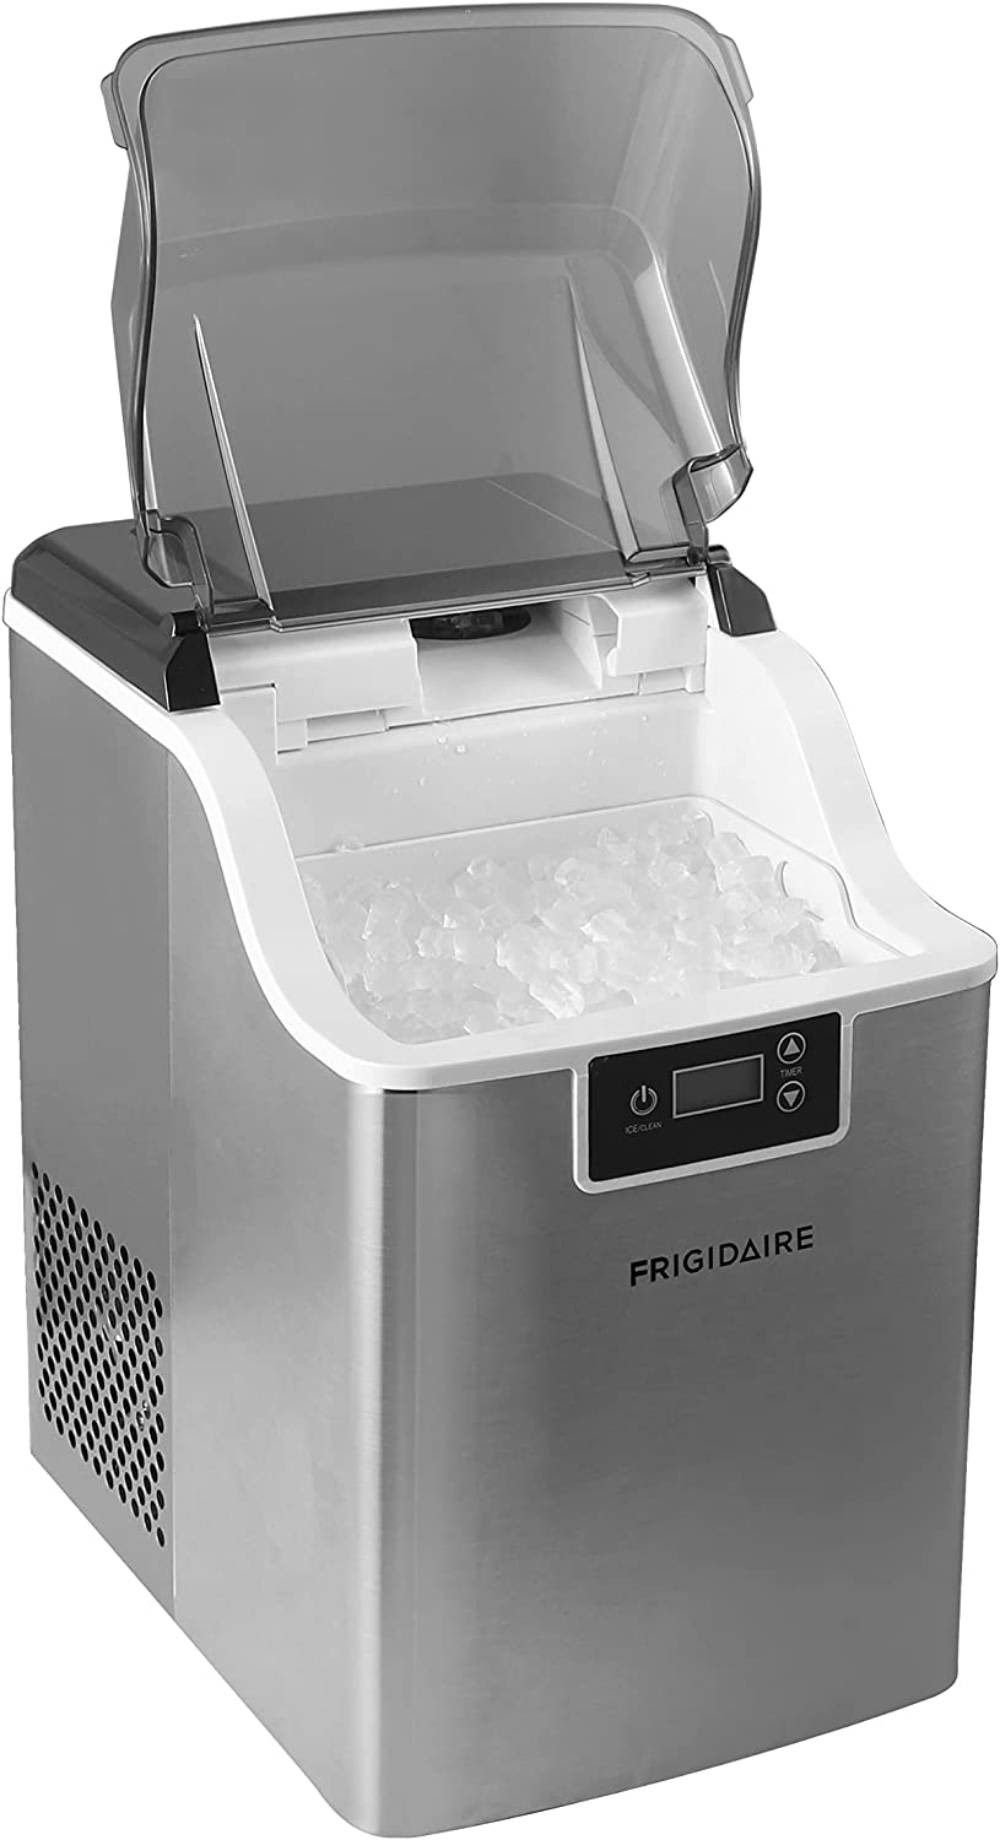 Frigidaire Gallery EFIC255 Nugget Ice Maker Review - Reviewed